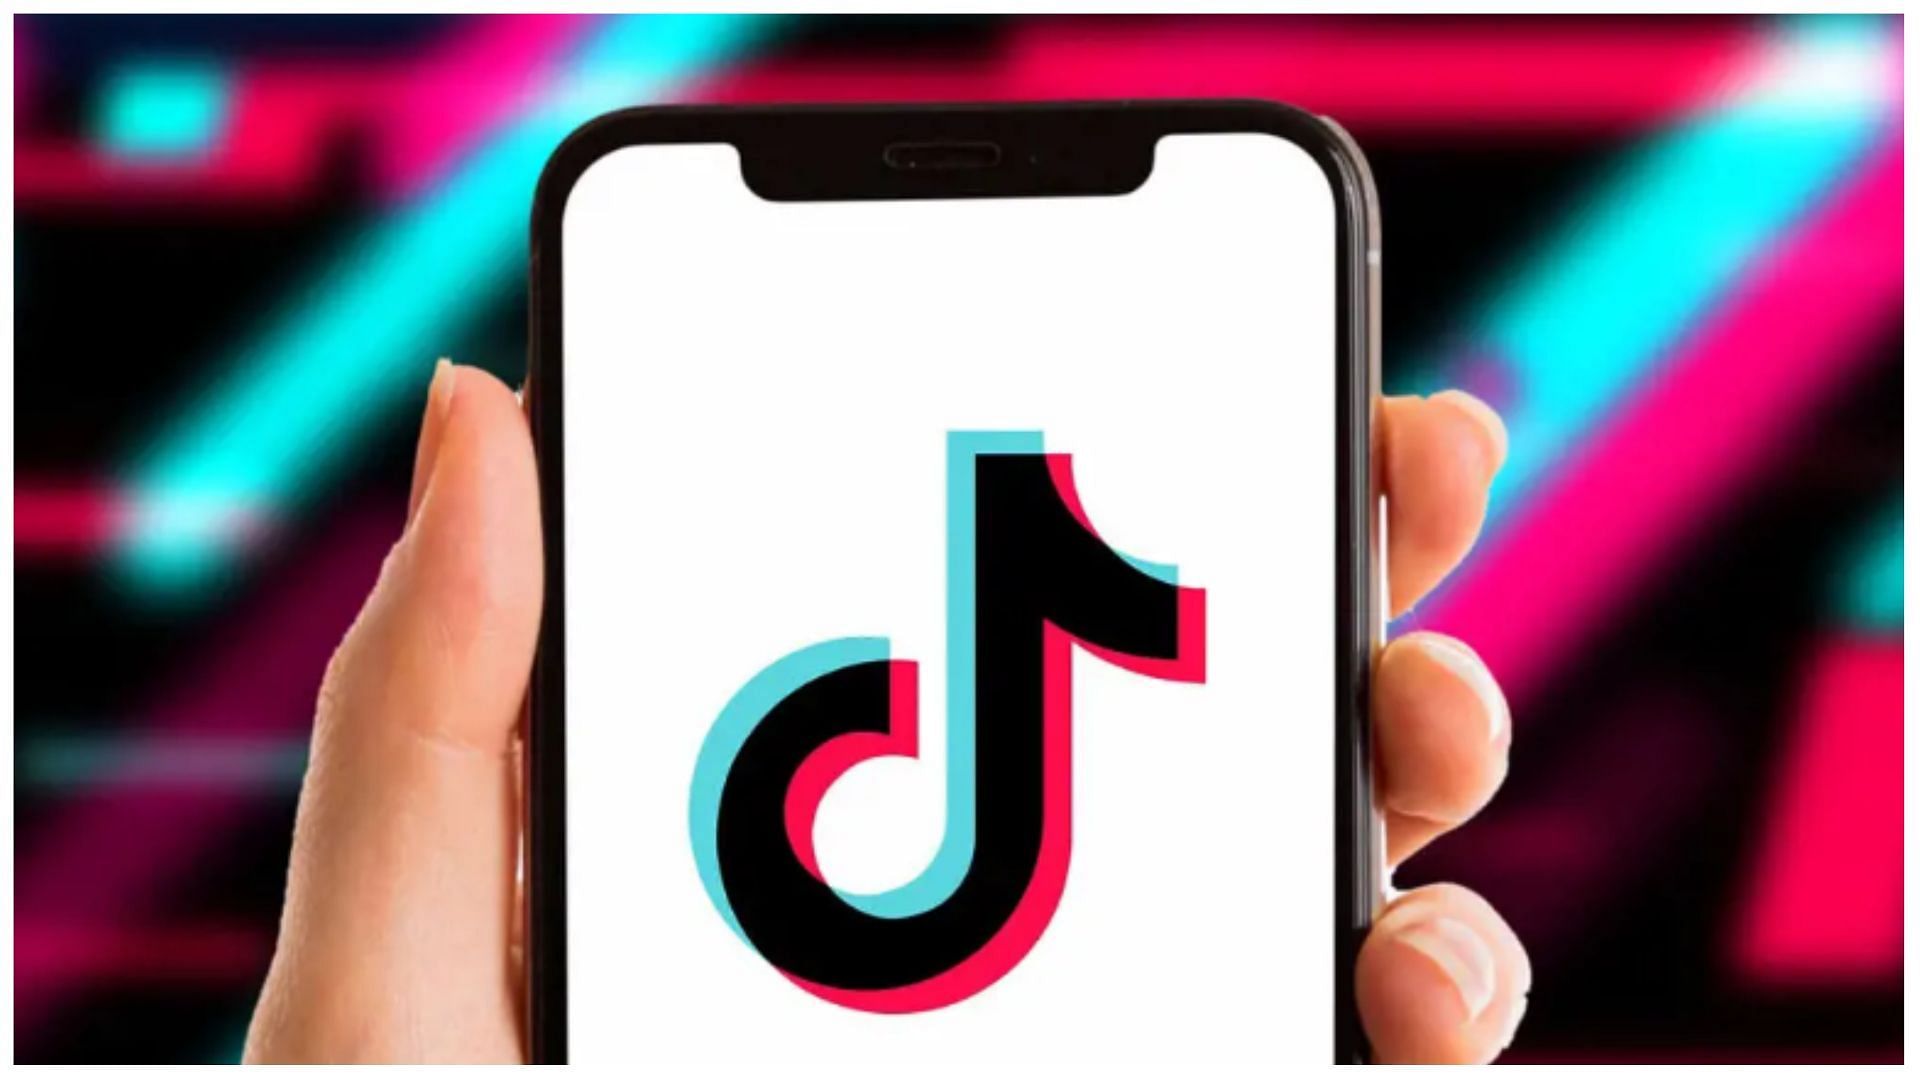 The Pulling Man game is a viral game trending on TikTok (image via Searchengineland)